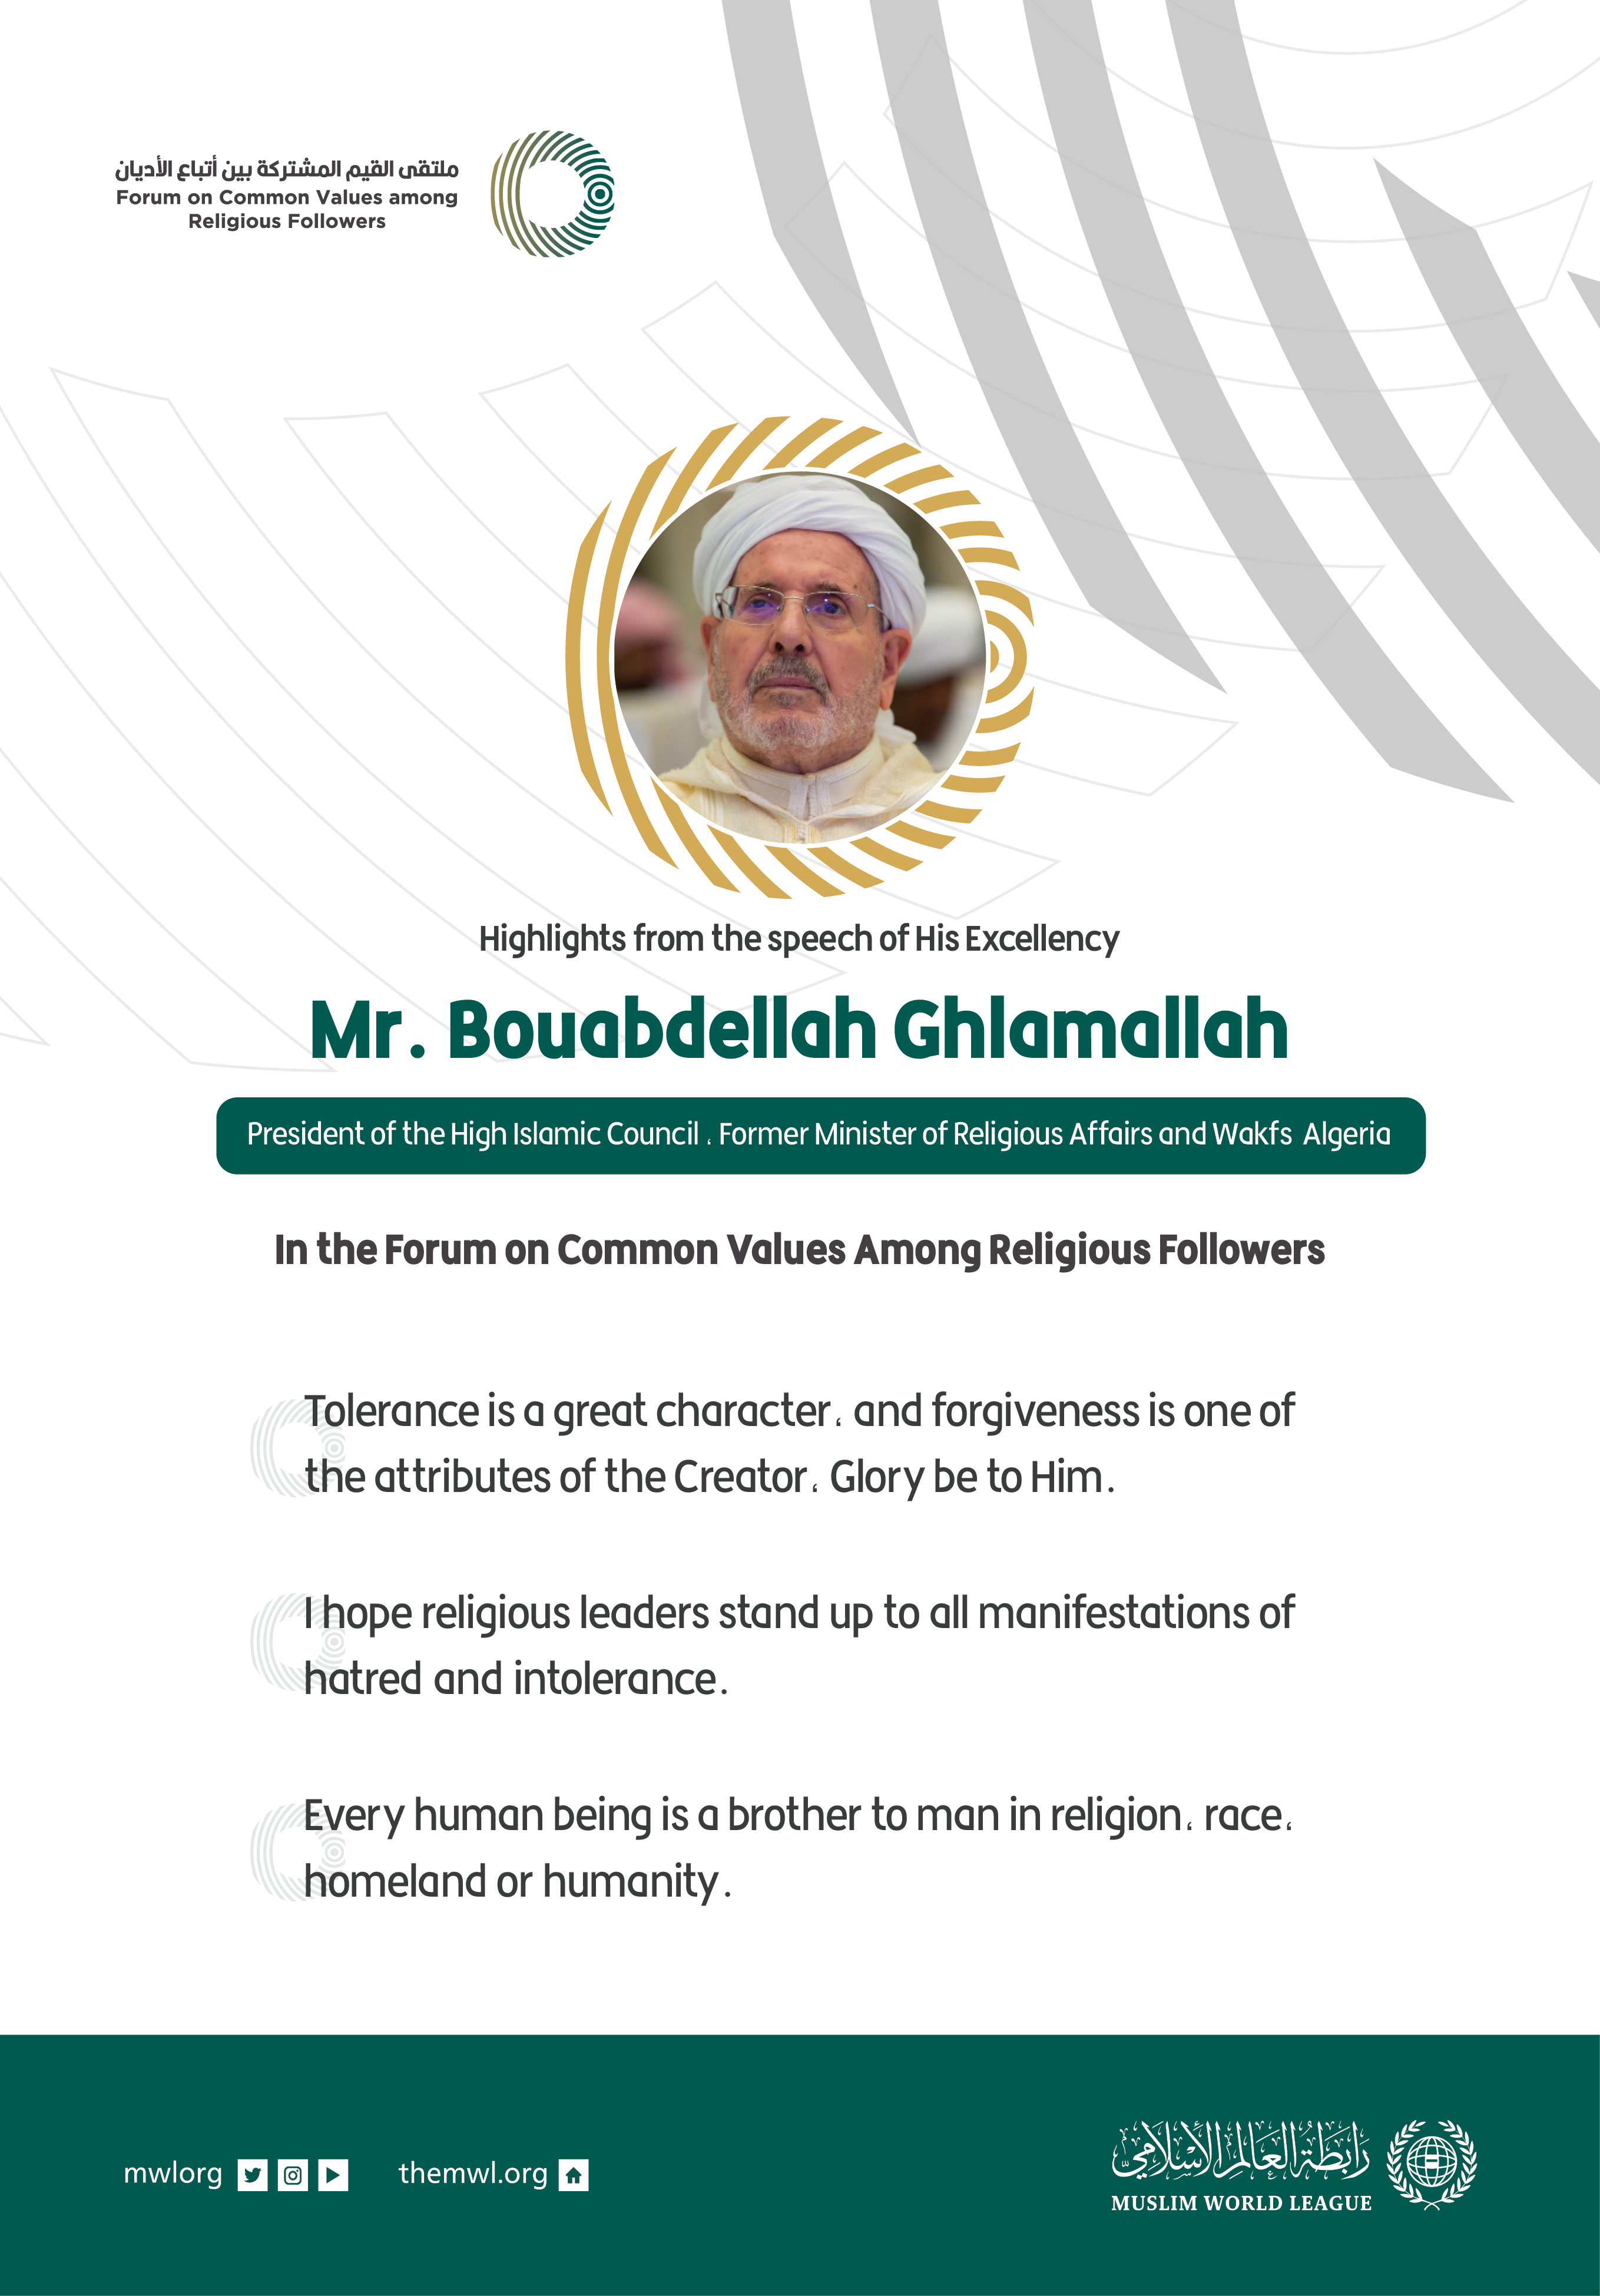 Highlights from the speech of His Excellency President of the High Islamic Council, Former Minister of Religious Affairs and Wakfs in Algeria Mr. Bouabdellah Ghlamallah in the Forum on Common Values Among Religious Followers in Riyadh: 